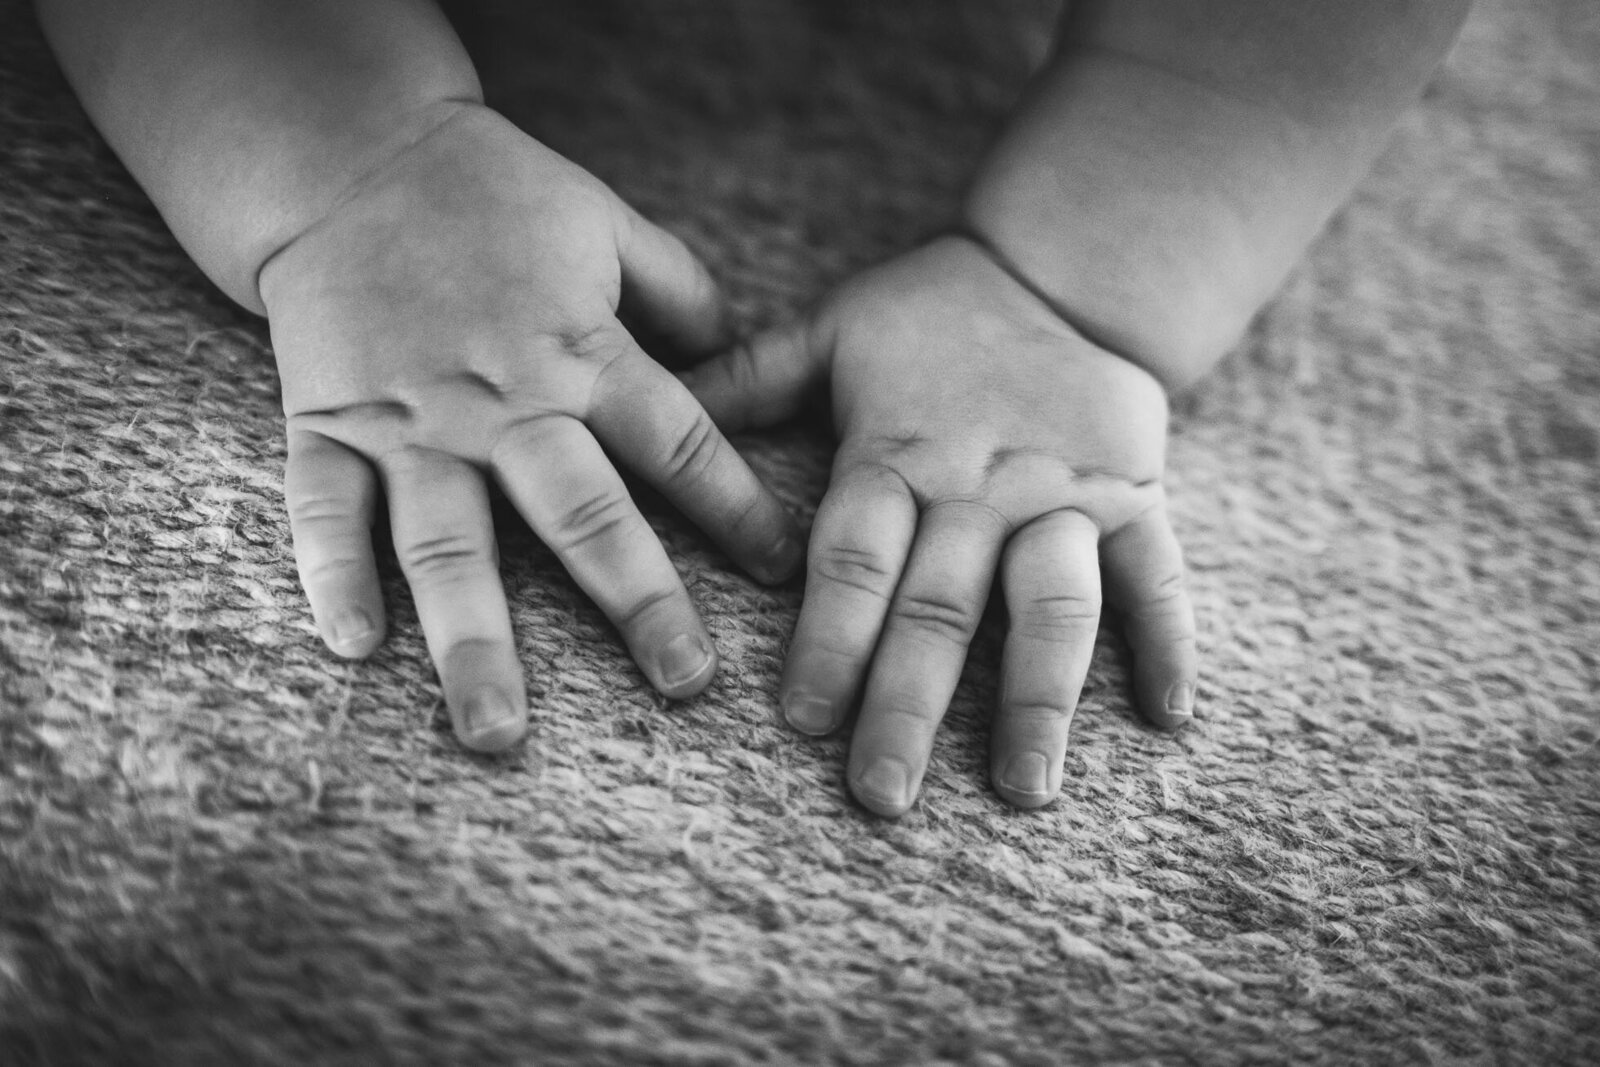 black & white image of chubby baby hands